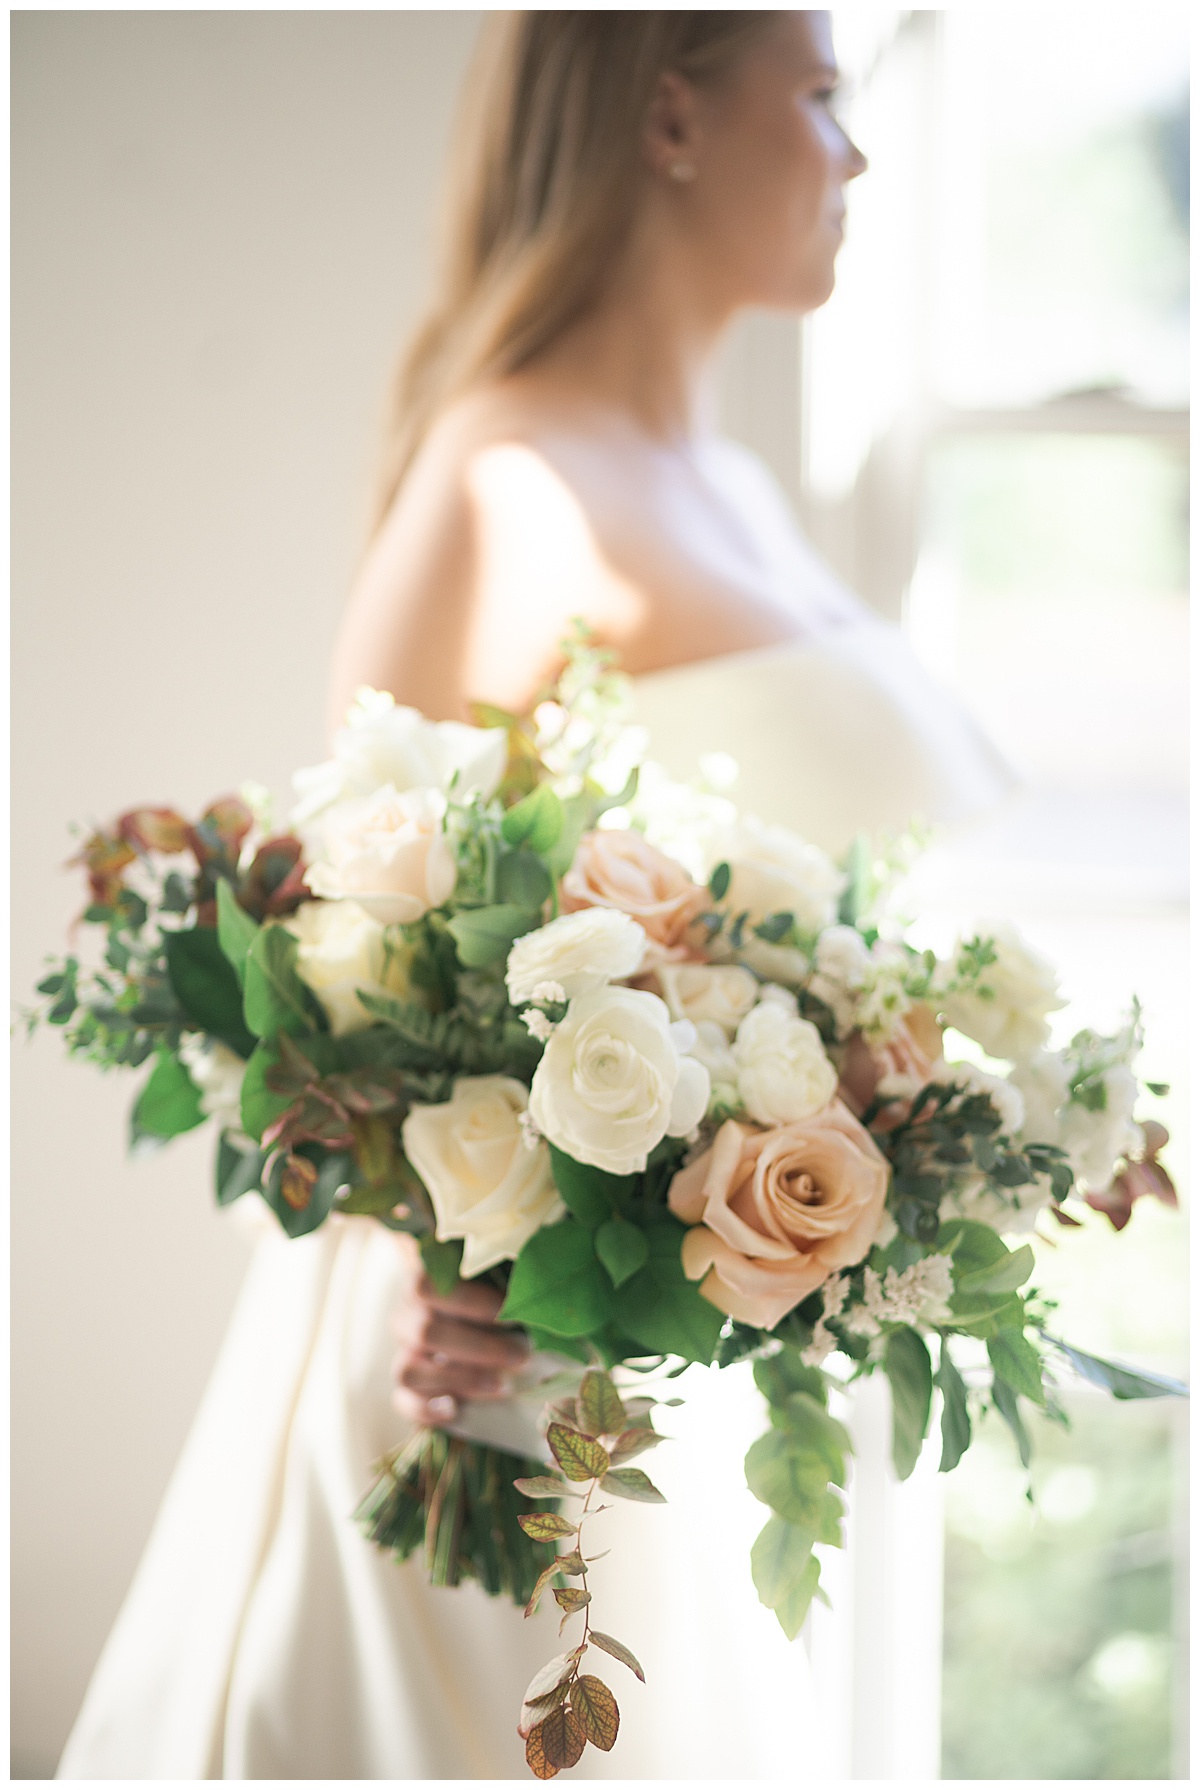 Gorgeous wedding bouquet for Stunning Bridal Portraits at The Creative Chateau